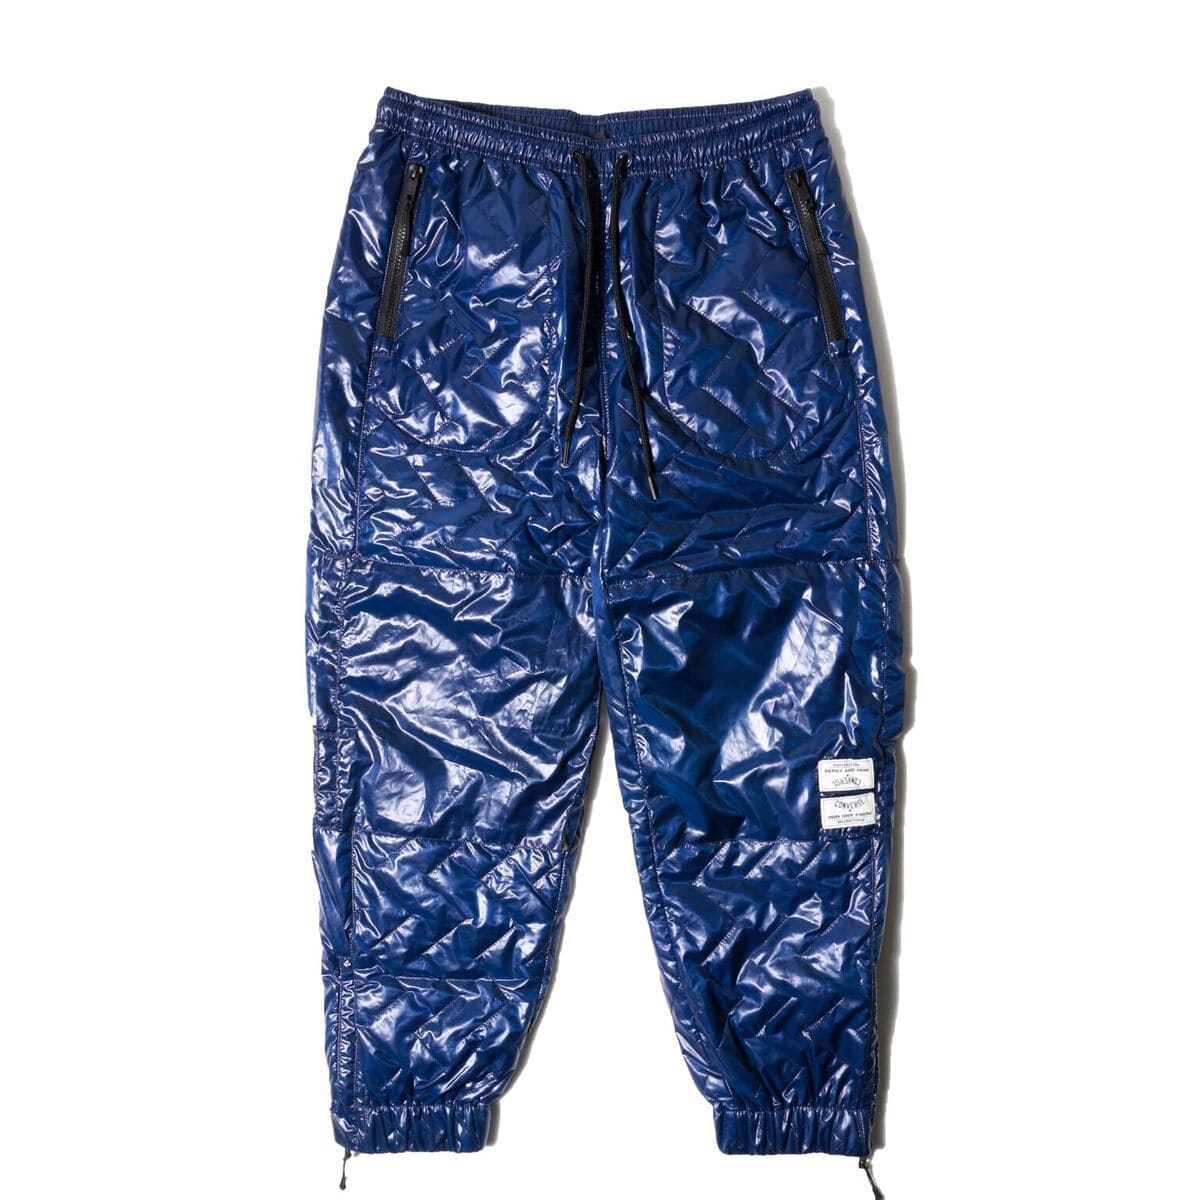 converse quilted pants